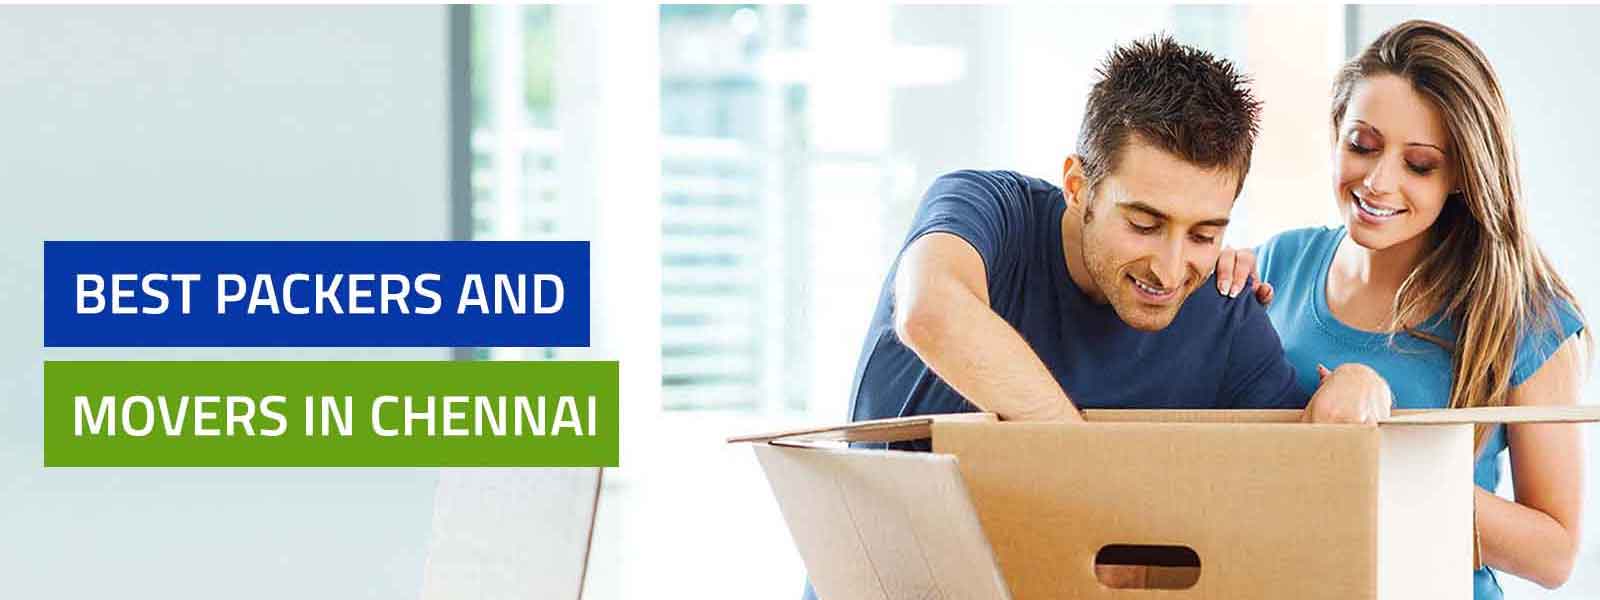 Best Packers and Movers In Chennai 